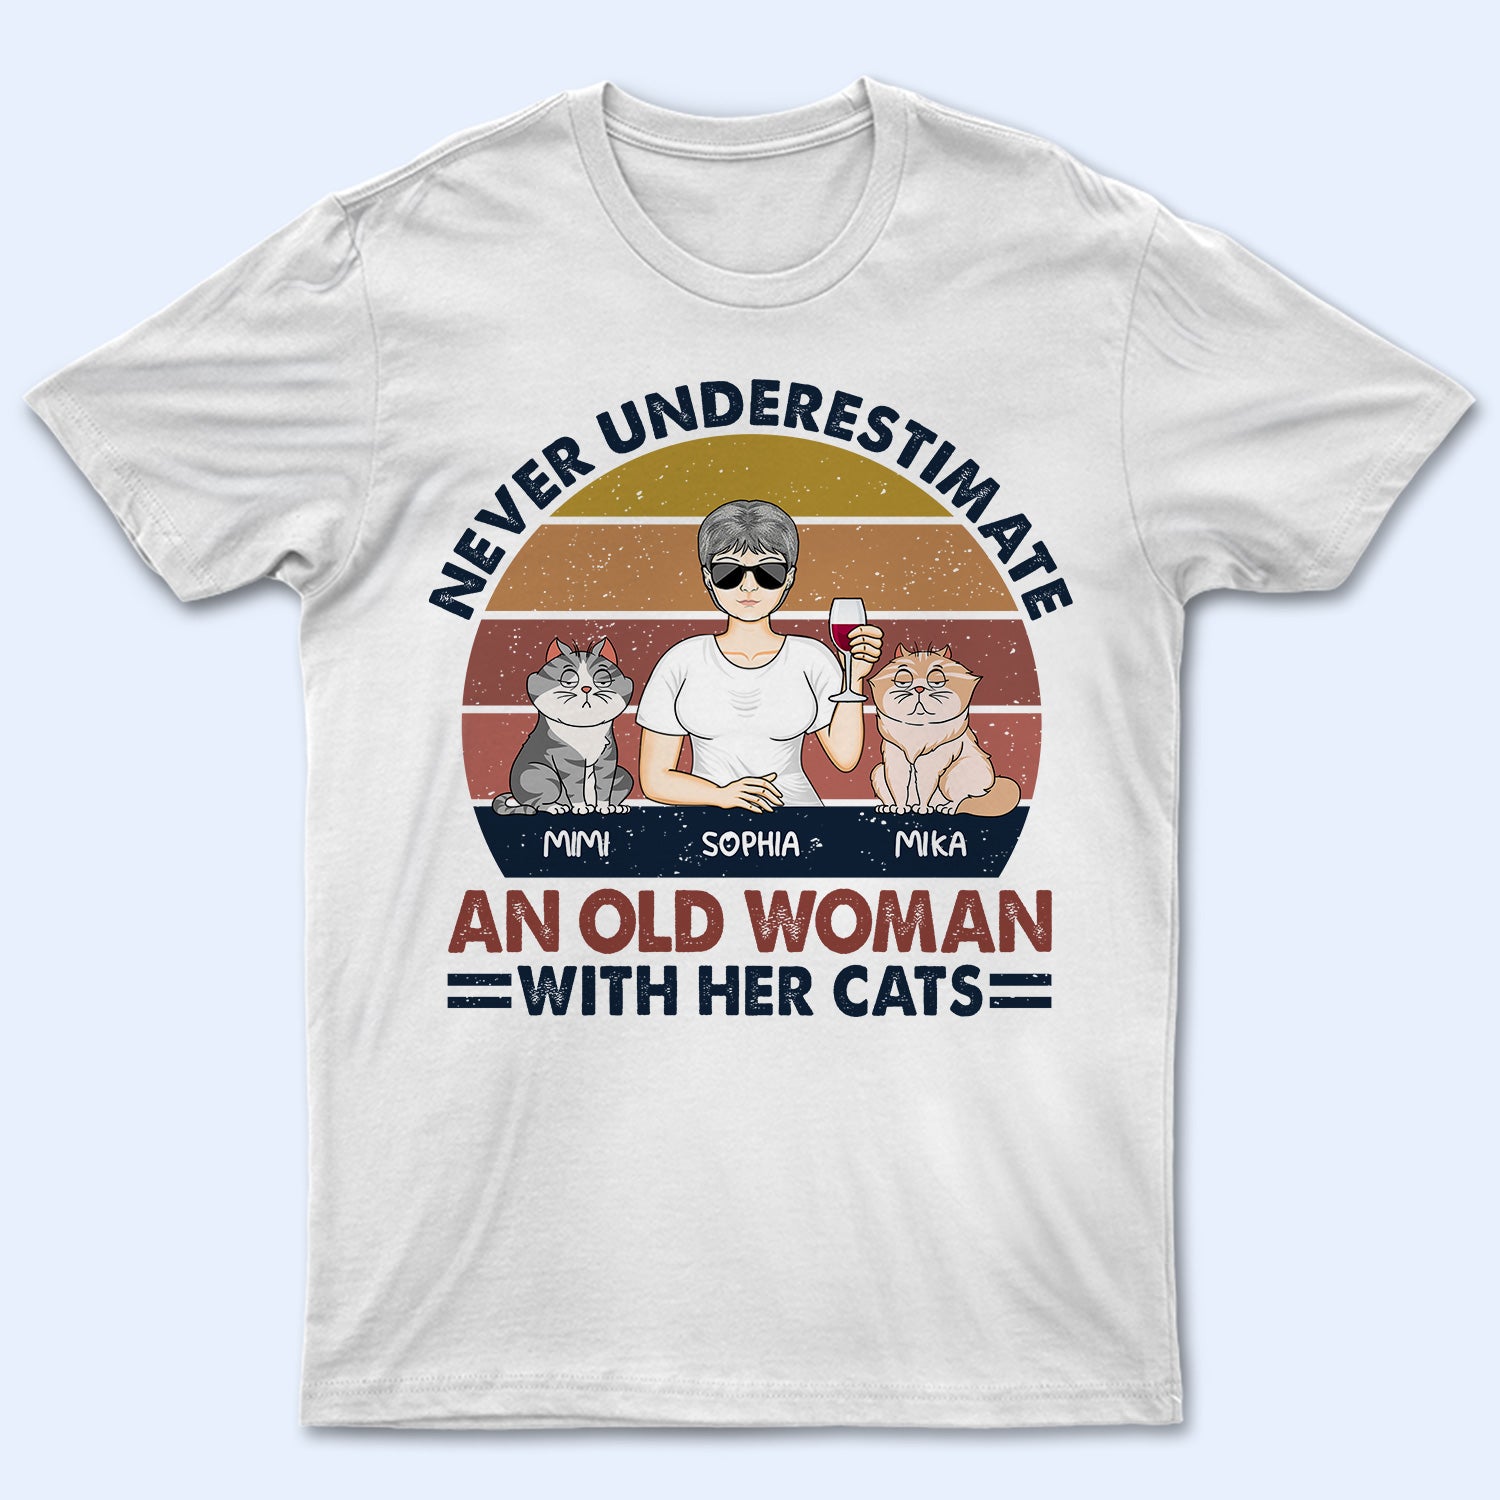 Never Underestimate An Old Woman With Her Cat - Birthday, Anniversary, Funny Gift For Mother, Girl, Cat Lovers - Personalized T Shirt